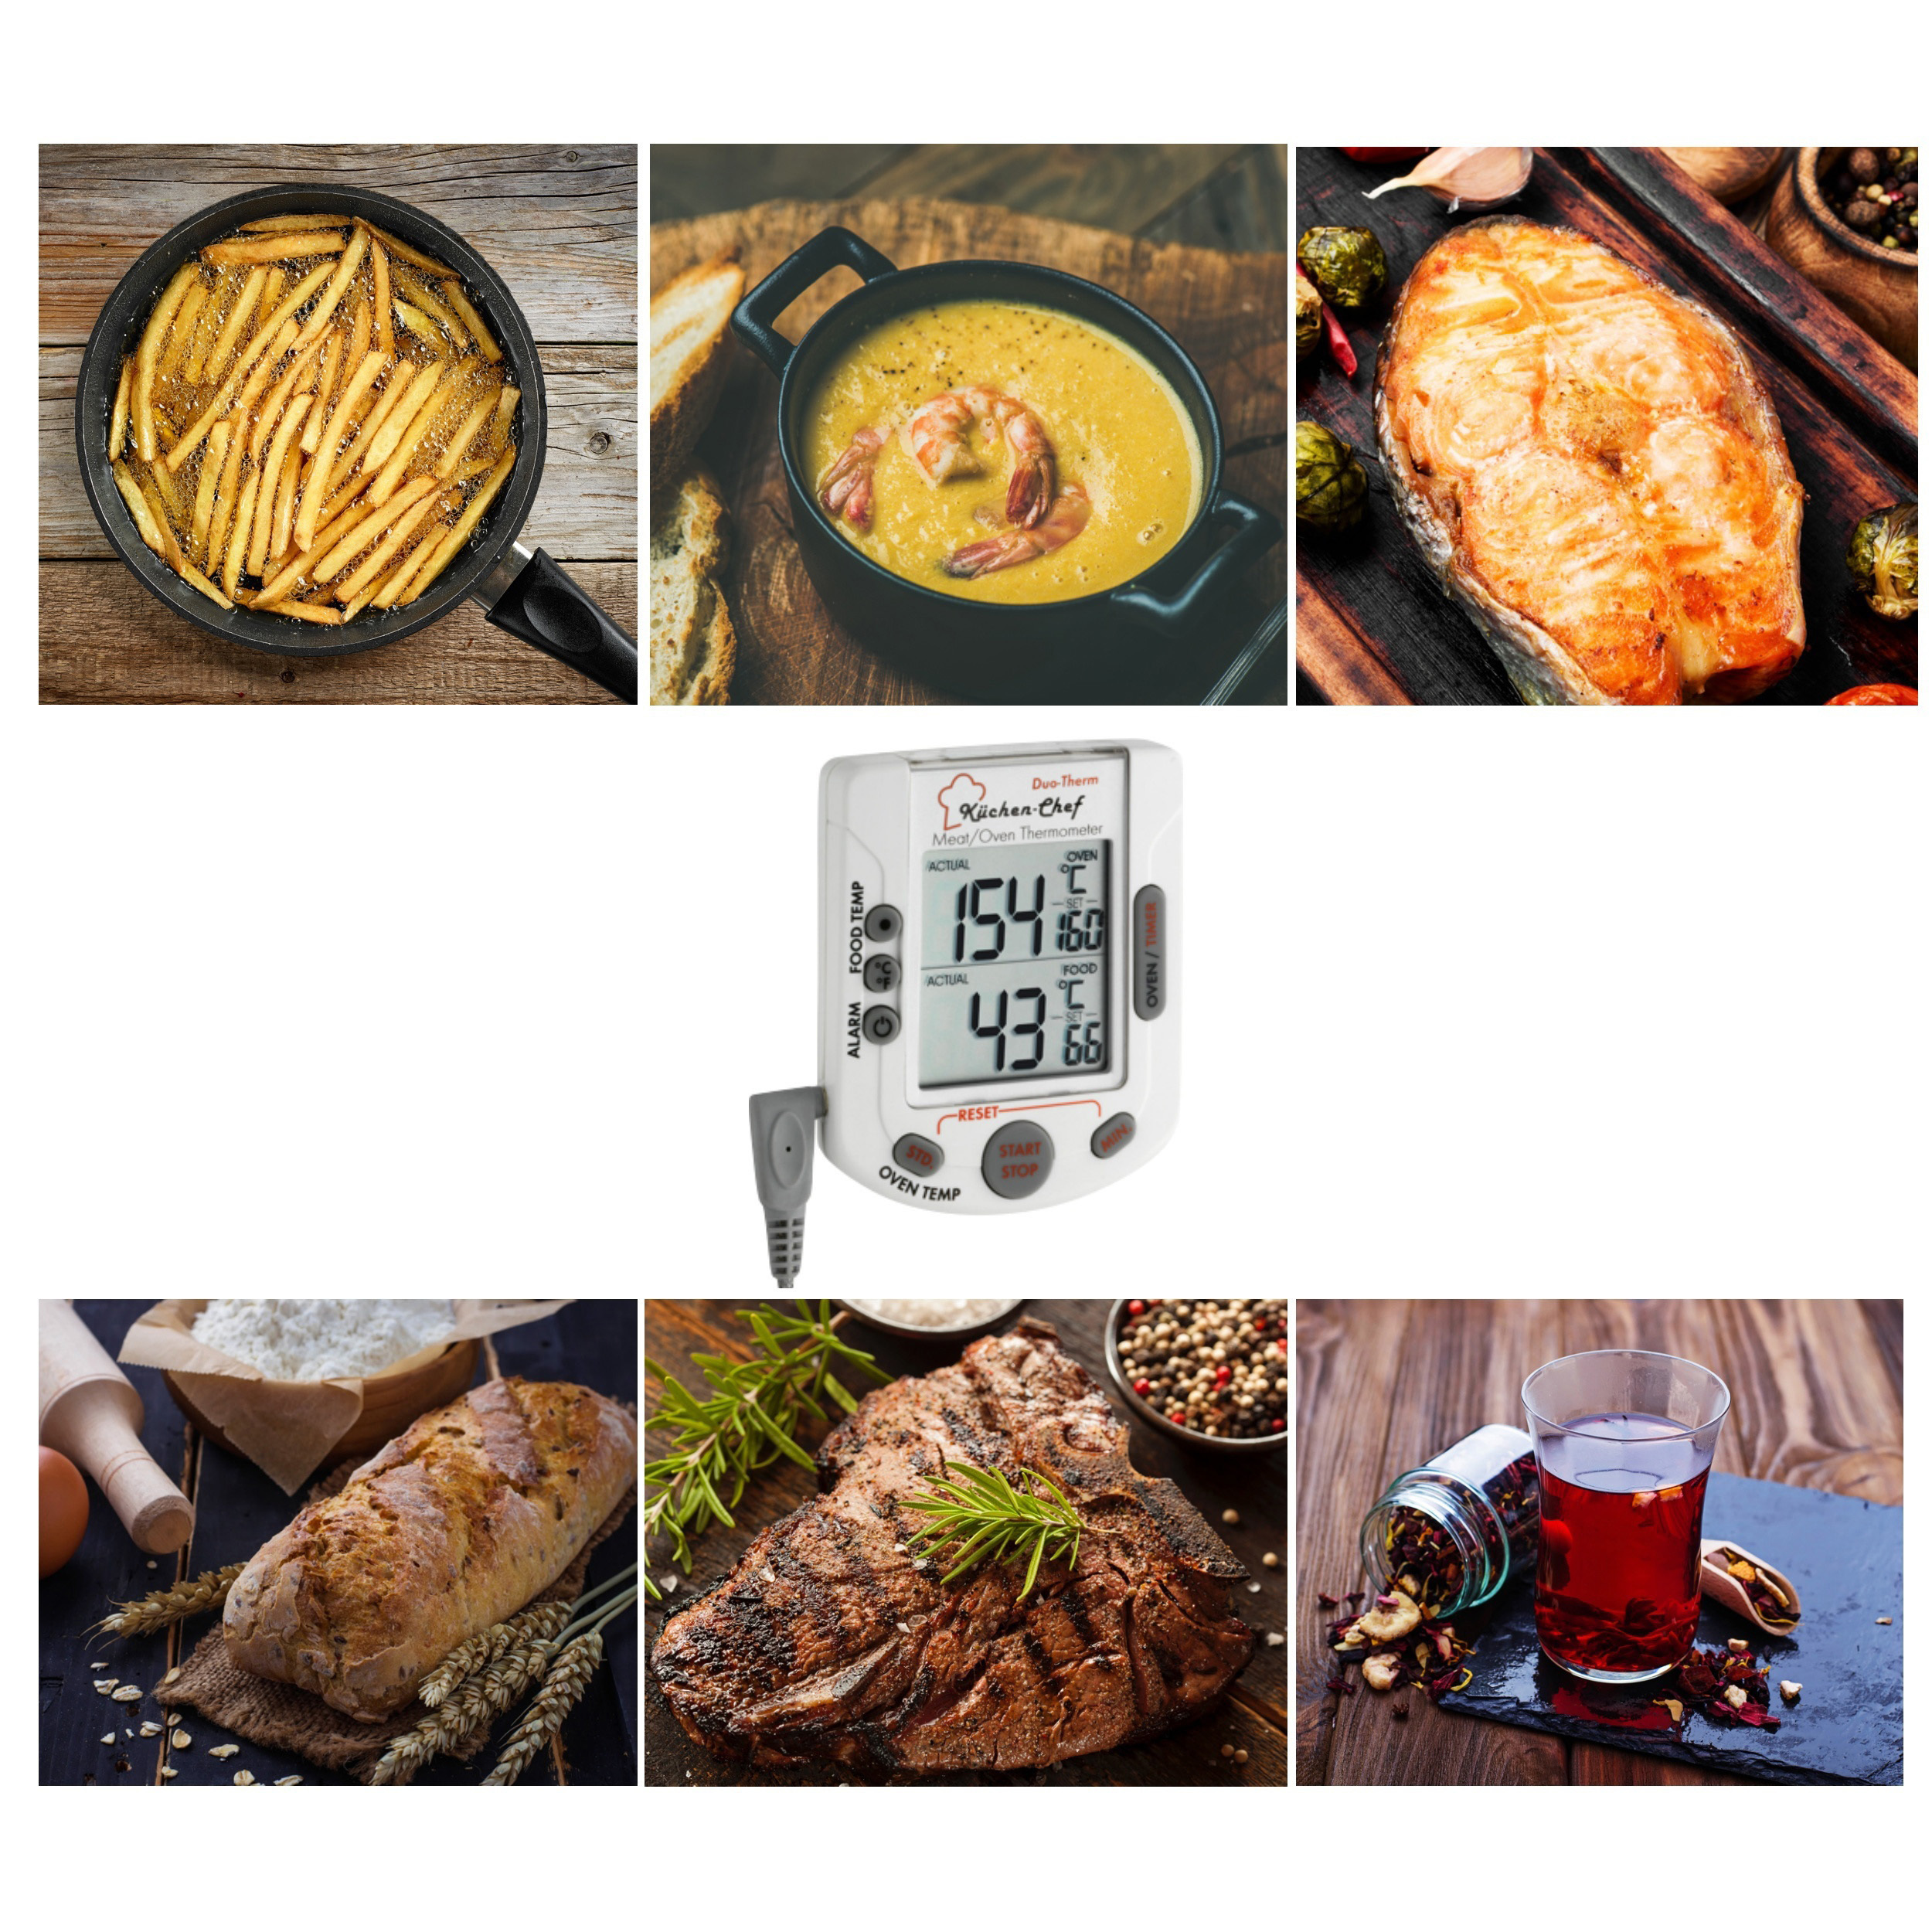 Digitales Grill-Braten-/Ofenthermometer KÜCHEN-CHEF DUO-THERM